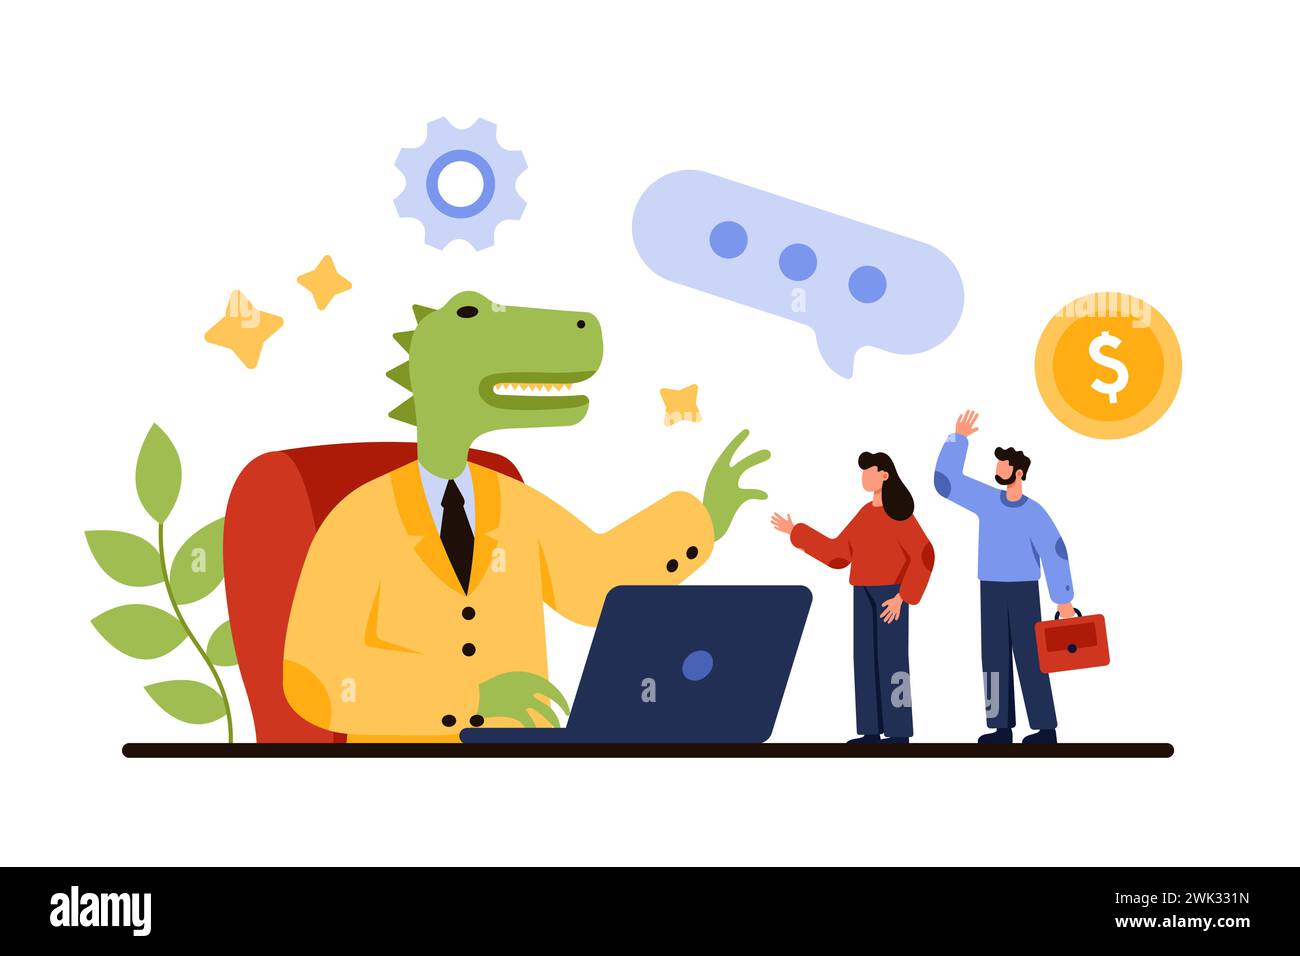 Outdated corporate leader with arrogant behavior of despot and dictator. Tiny people trying to share opinion with giant dinosaur businessman sitting at desk with laptop cartoon vector illustration Stock Vector